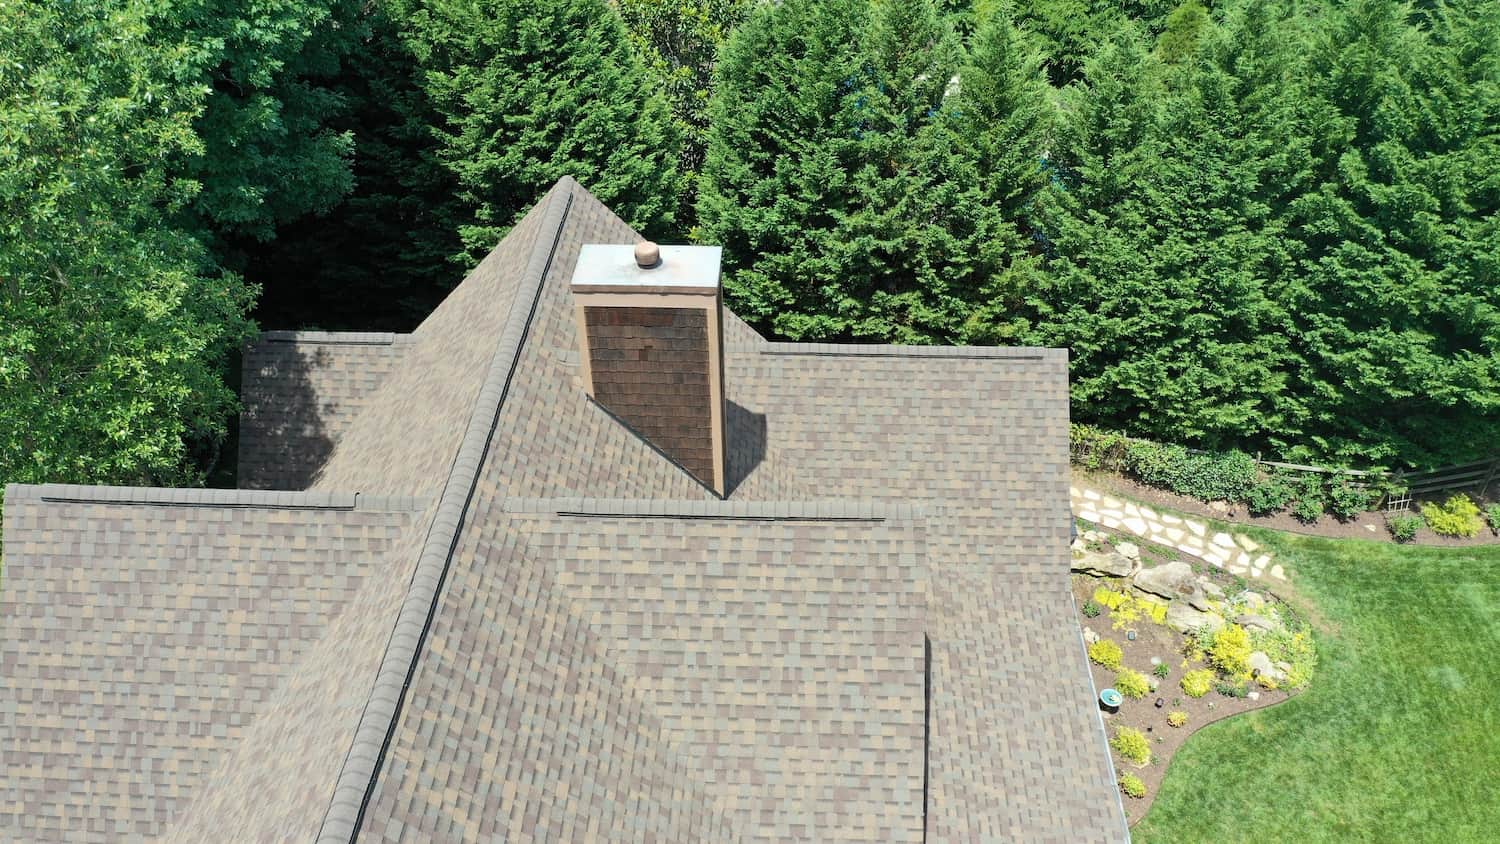 http://side%20aerial%20view%20of%20trudefinition%20duration%20teak%20shingles%20on%20residential%20home%20with%20chimney